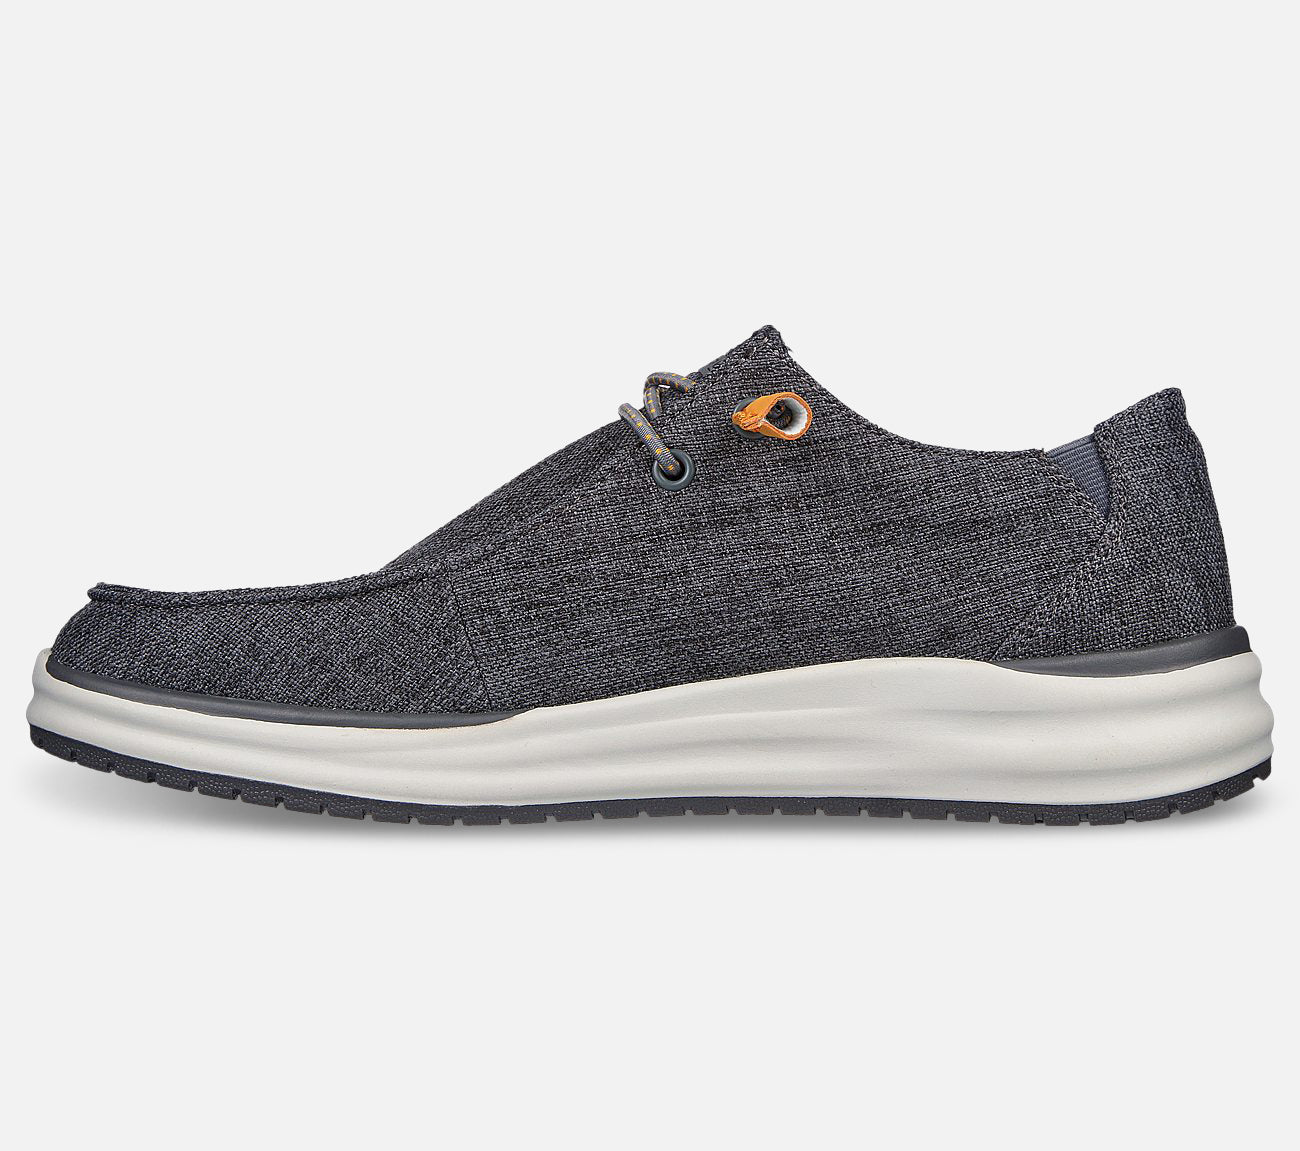 Arch Fit Melo - Tandro Shoe Skechers